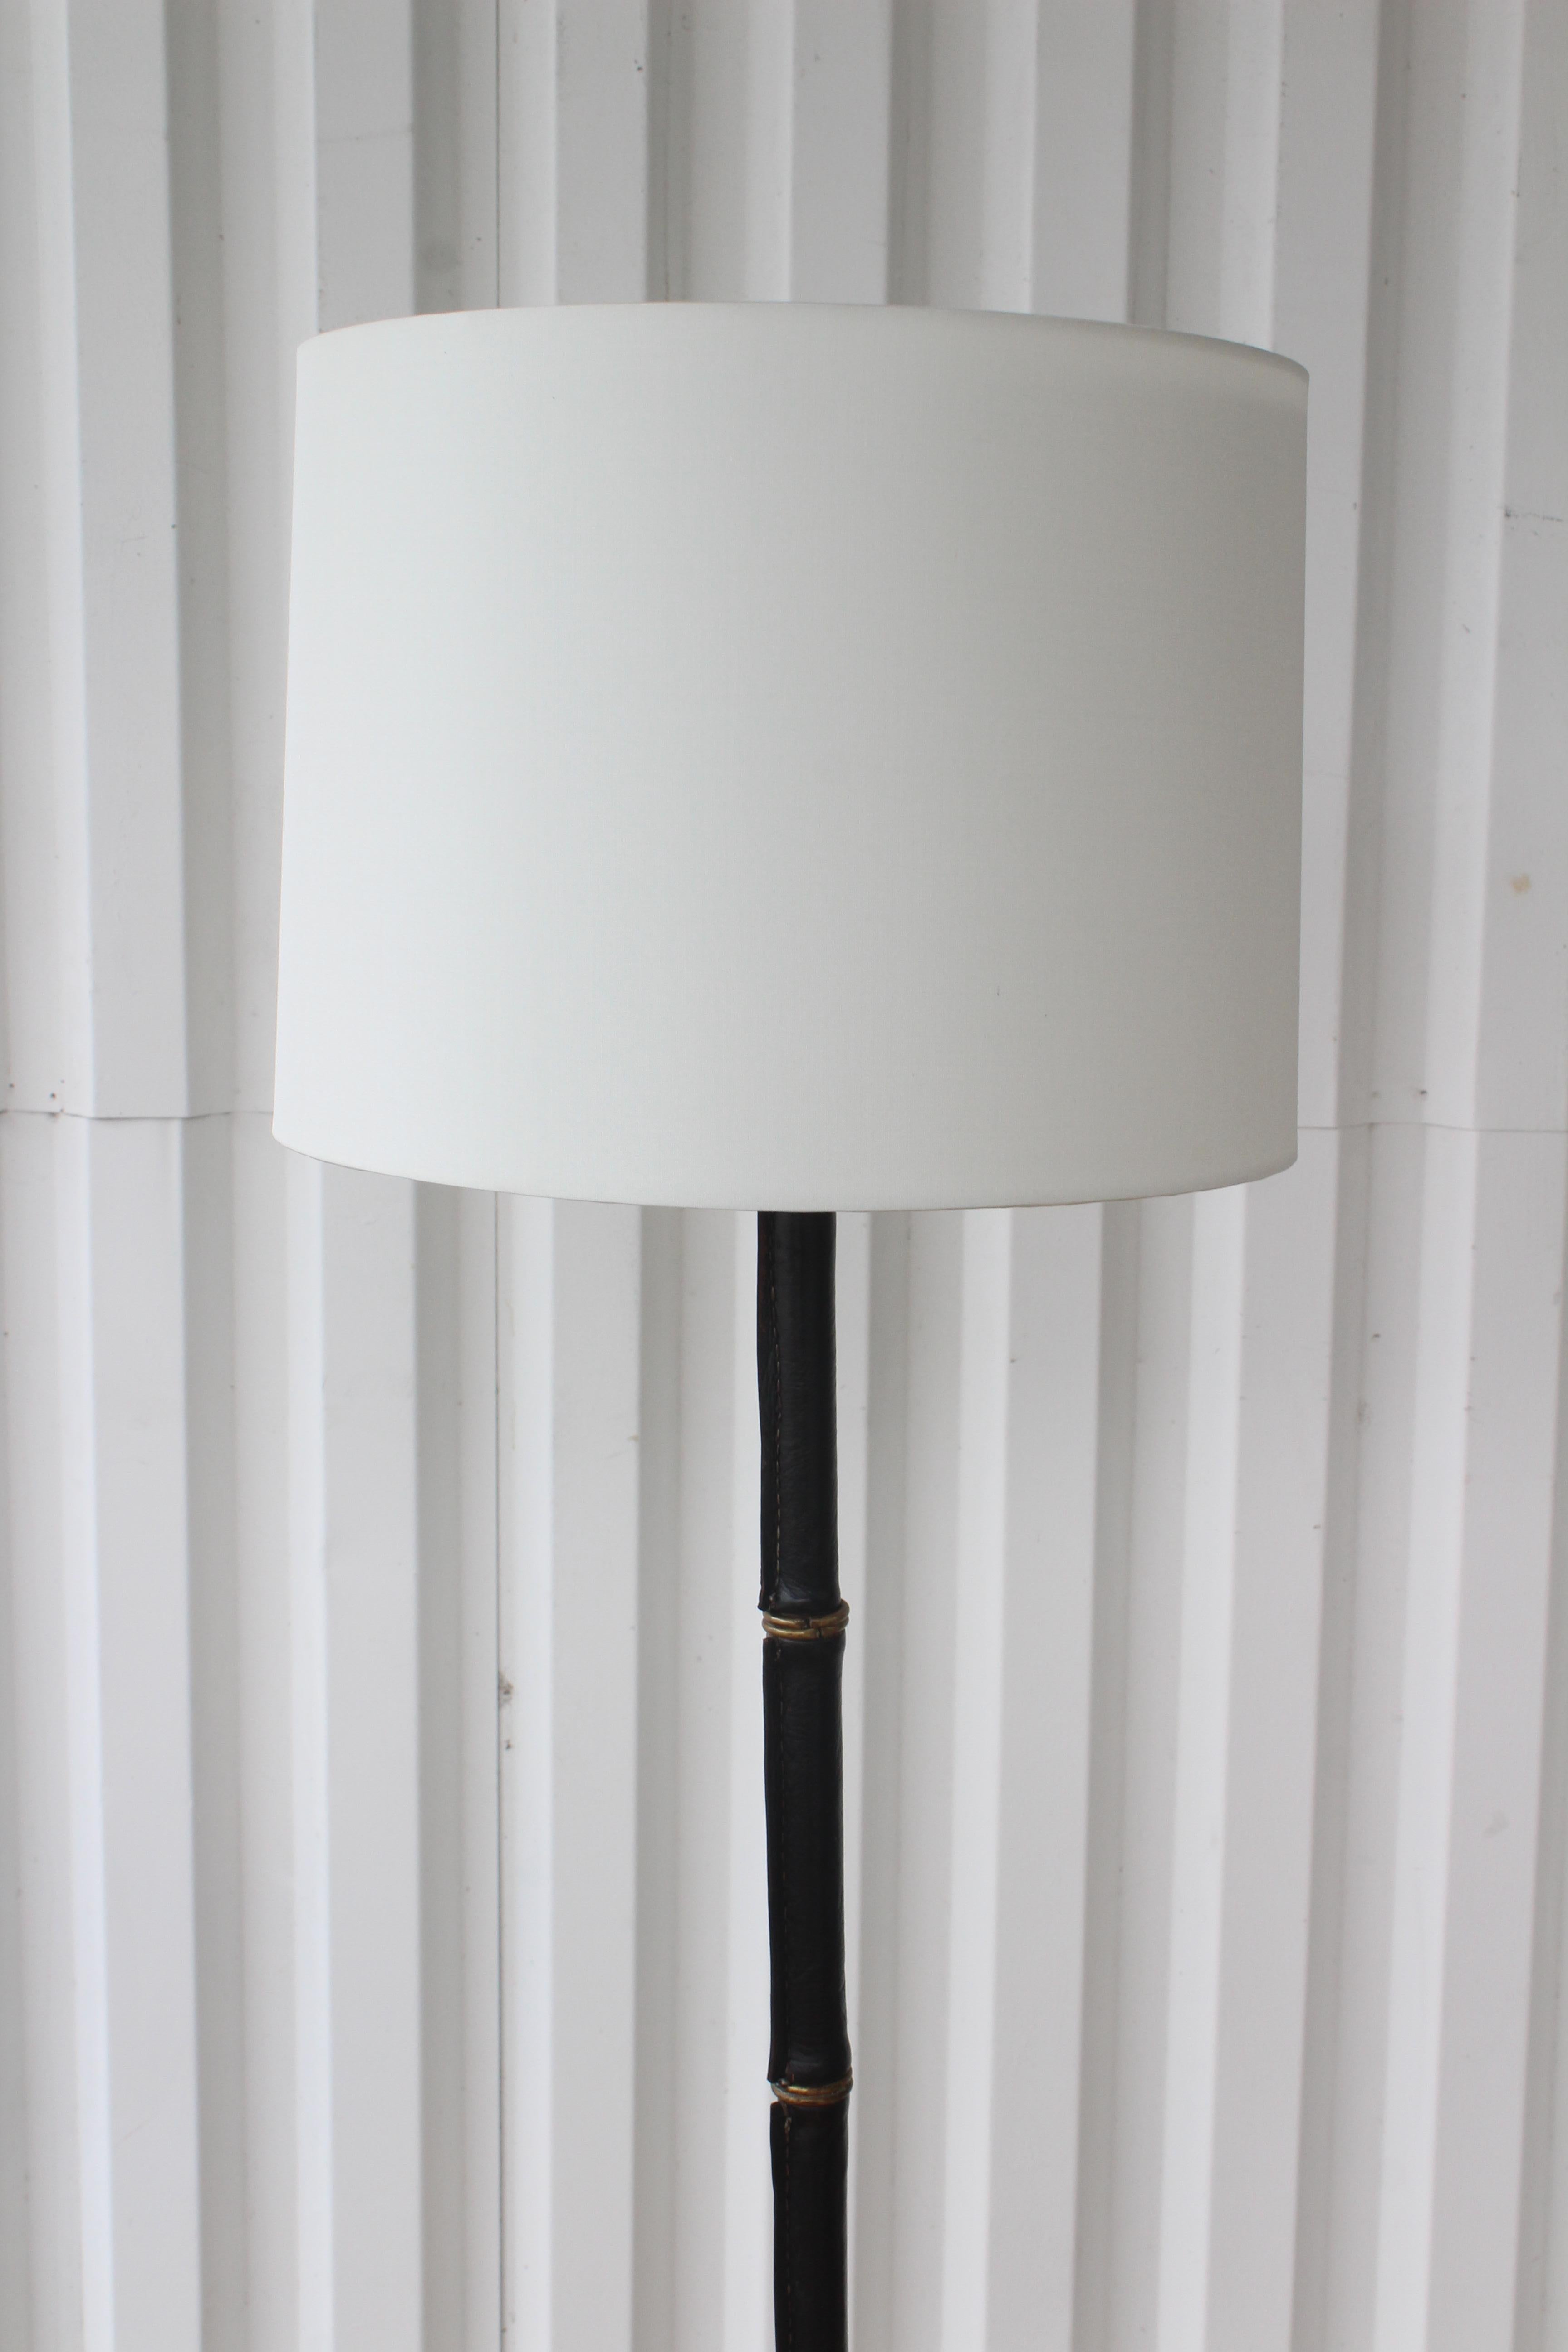 Vintage stitched leather floor lamp with brass accents by Jacques Adnet, made in France in the 1950s. The stitched black leather shows age appropriate wear but is in overall great condition considering the age of the piece. The brass ring accents